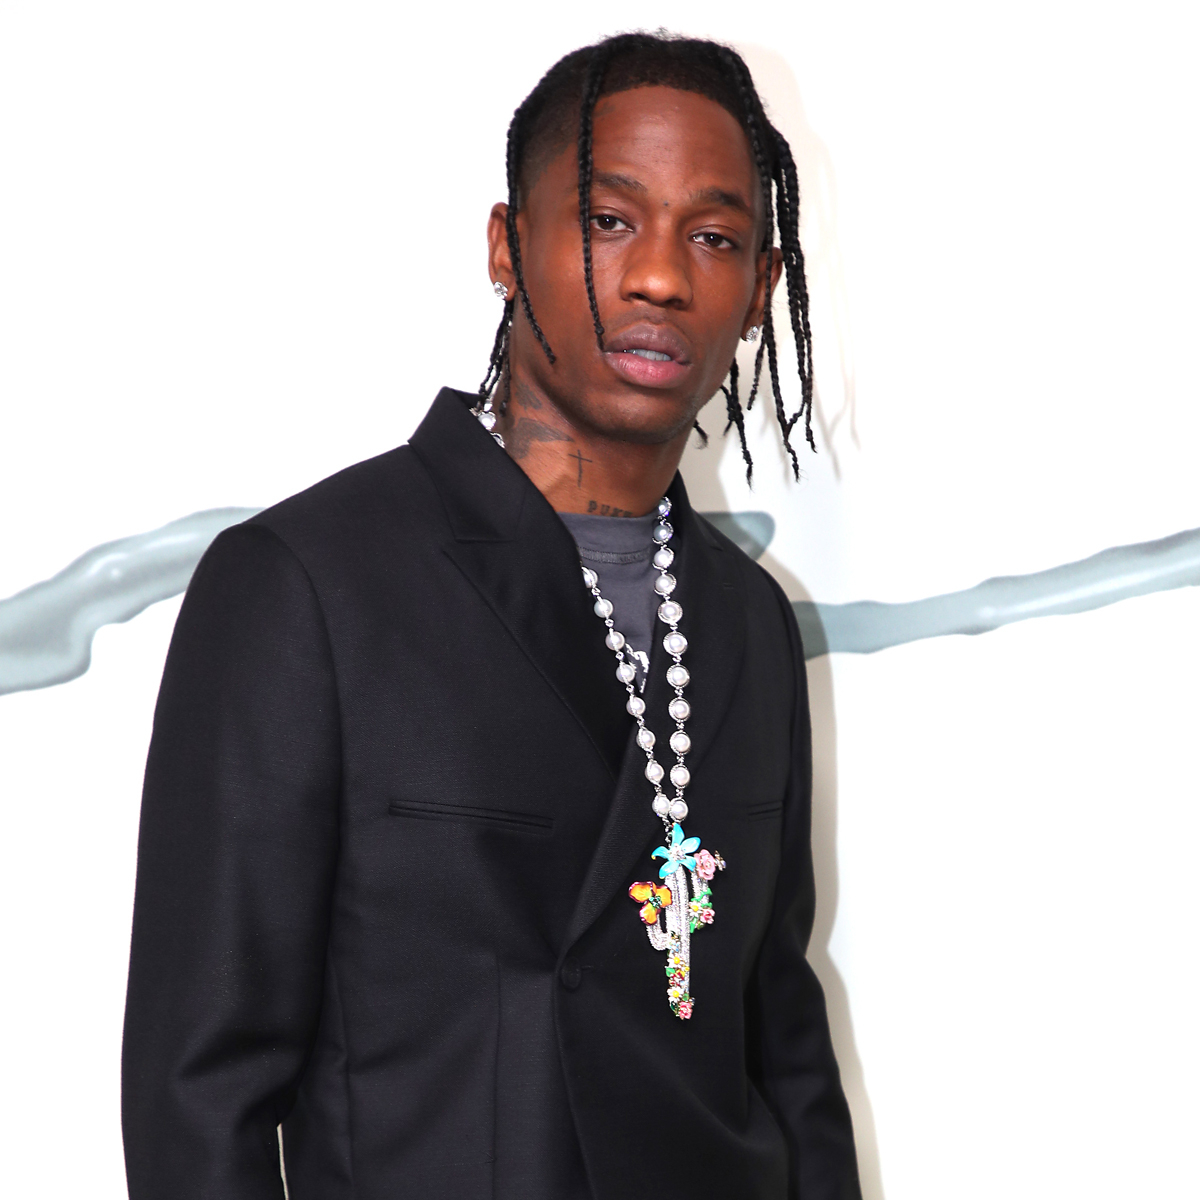 Police Searching for Travis Scott After Rapper Allegedly Punches Man at New York Nightclub – E! Online